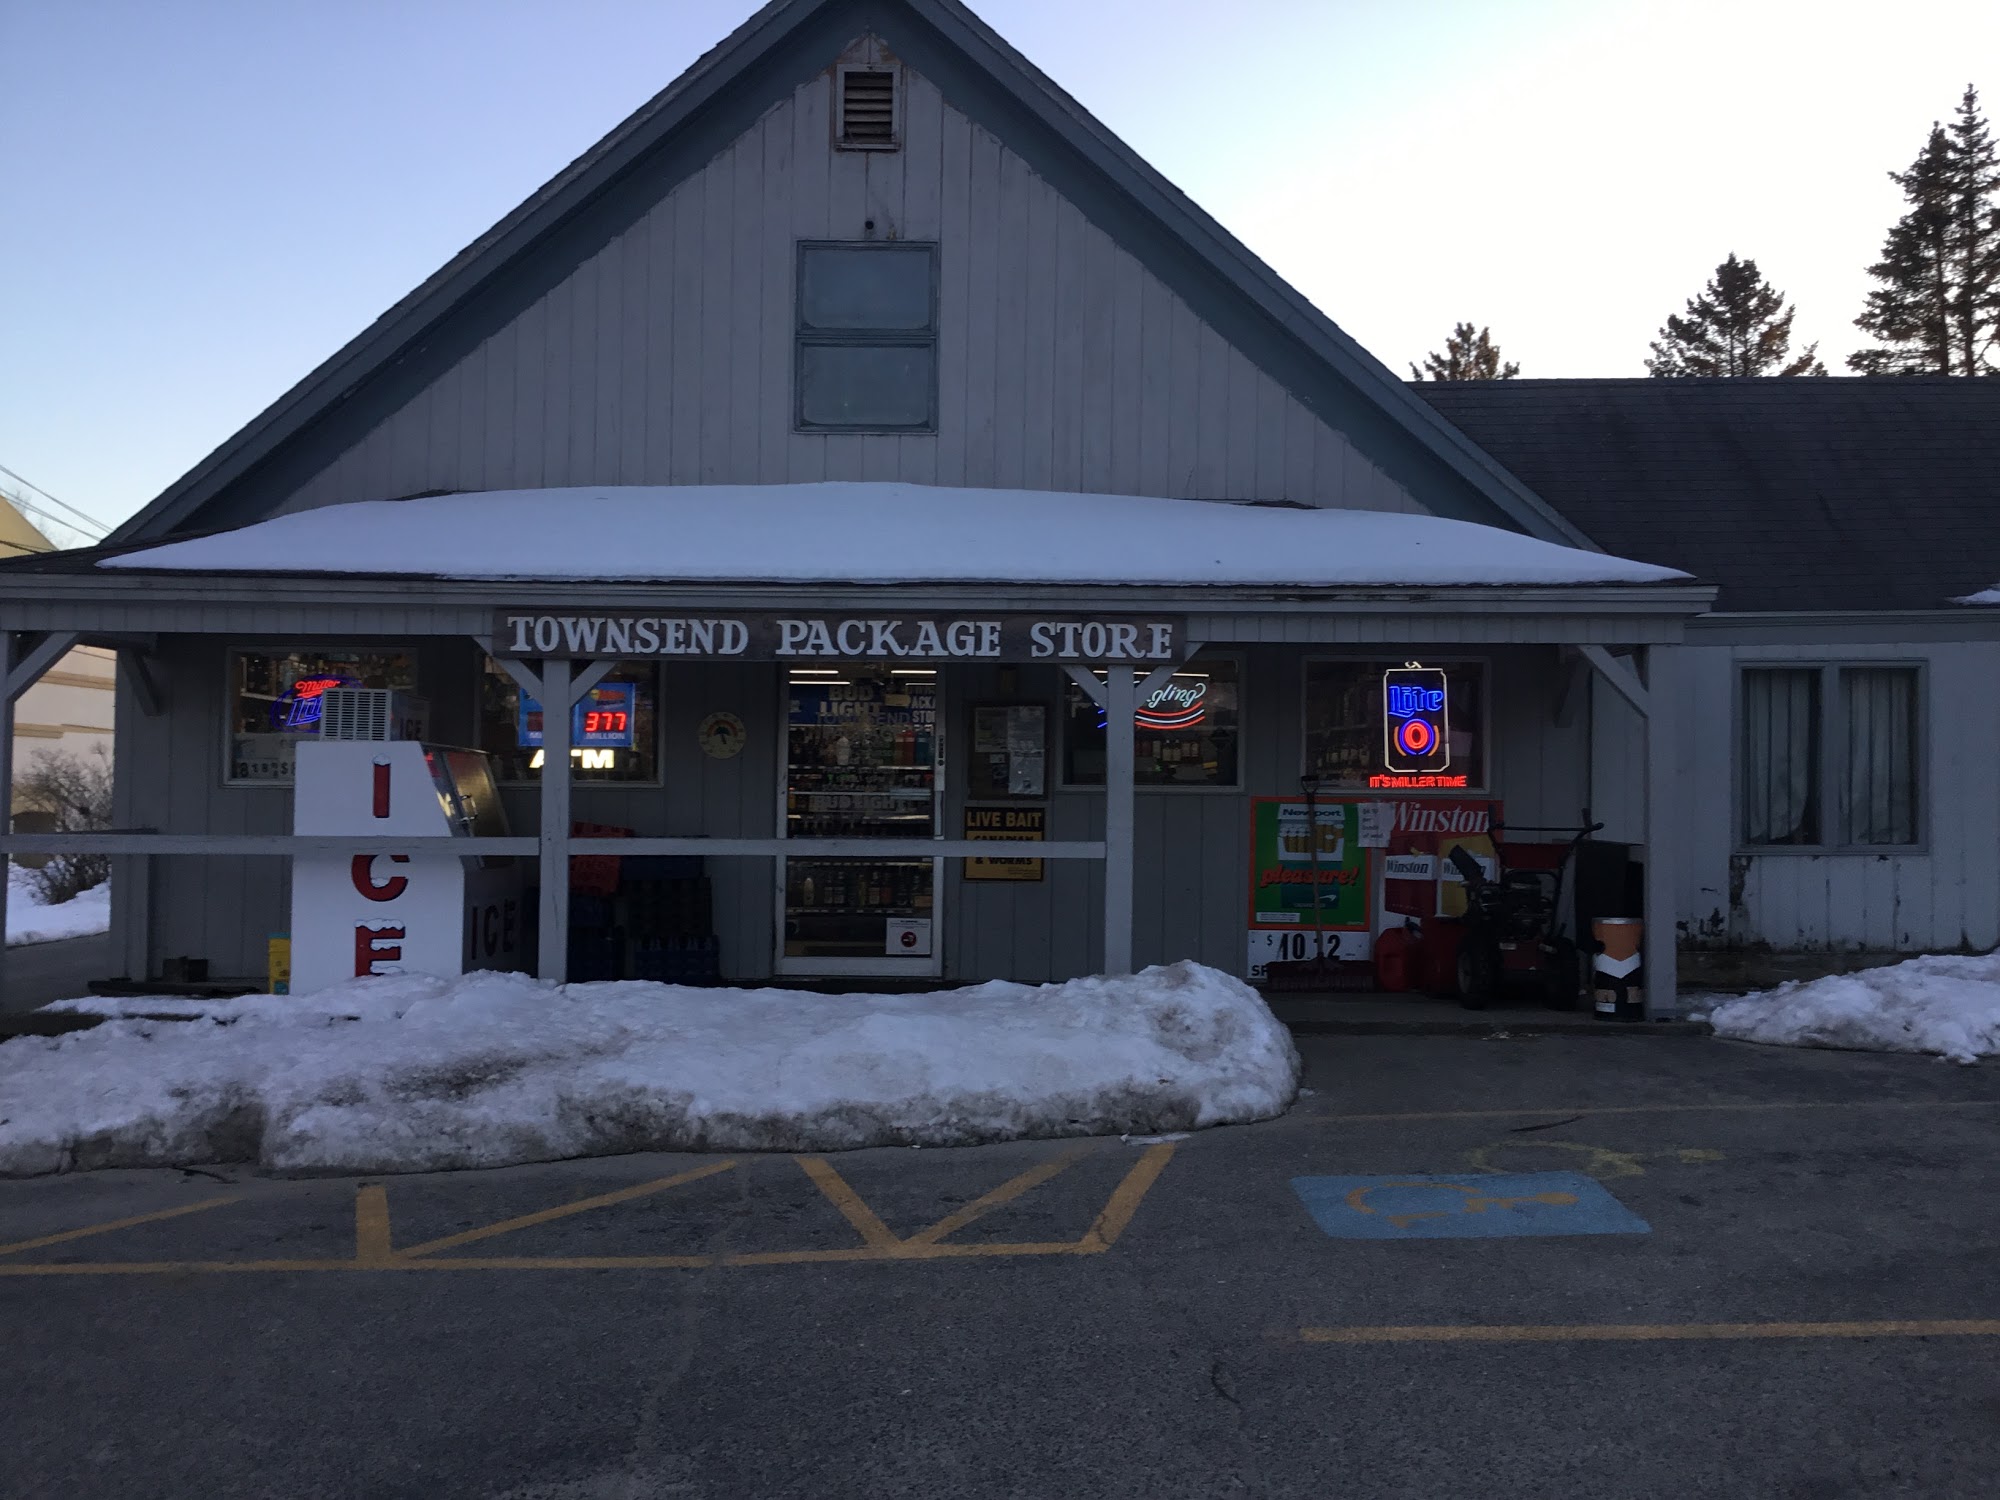 Townsend Package store